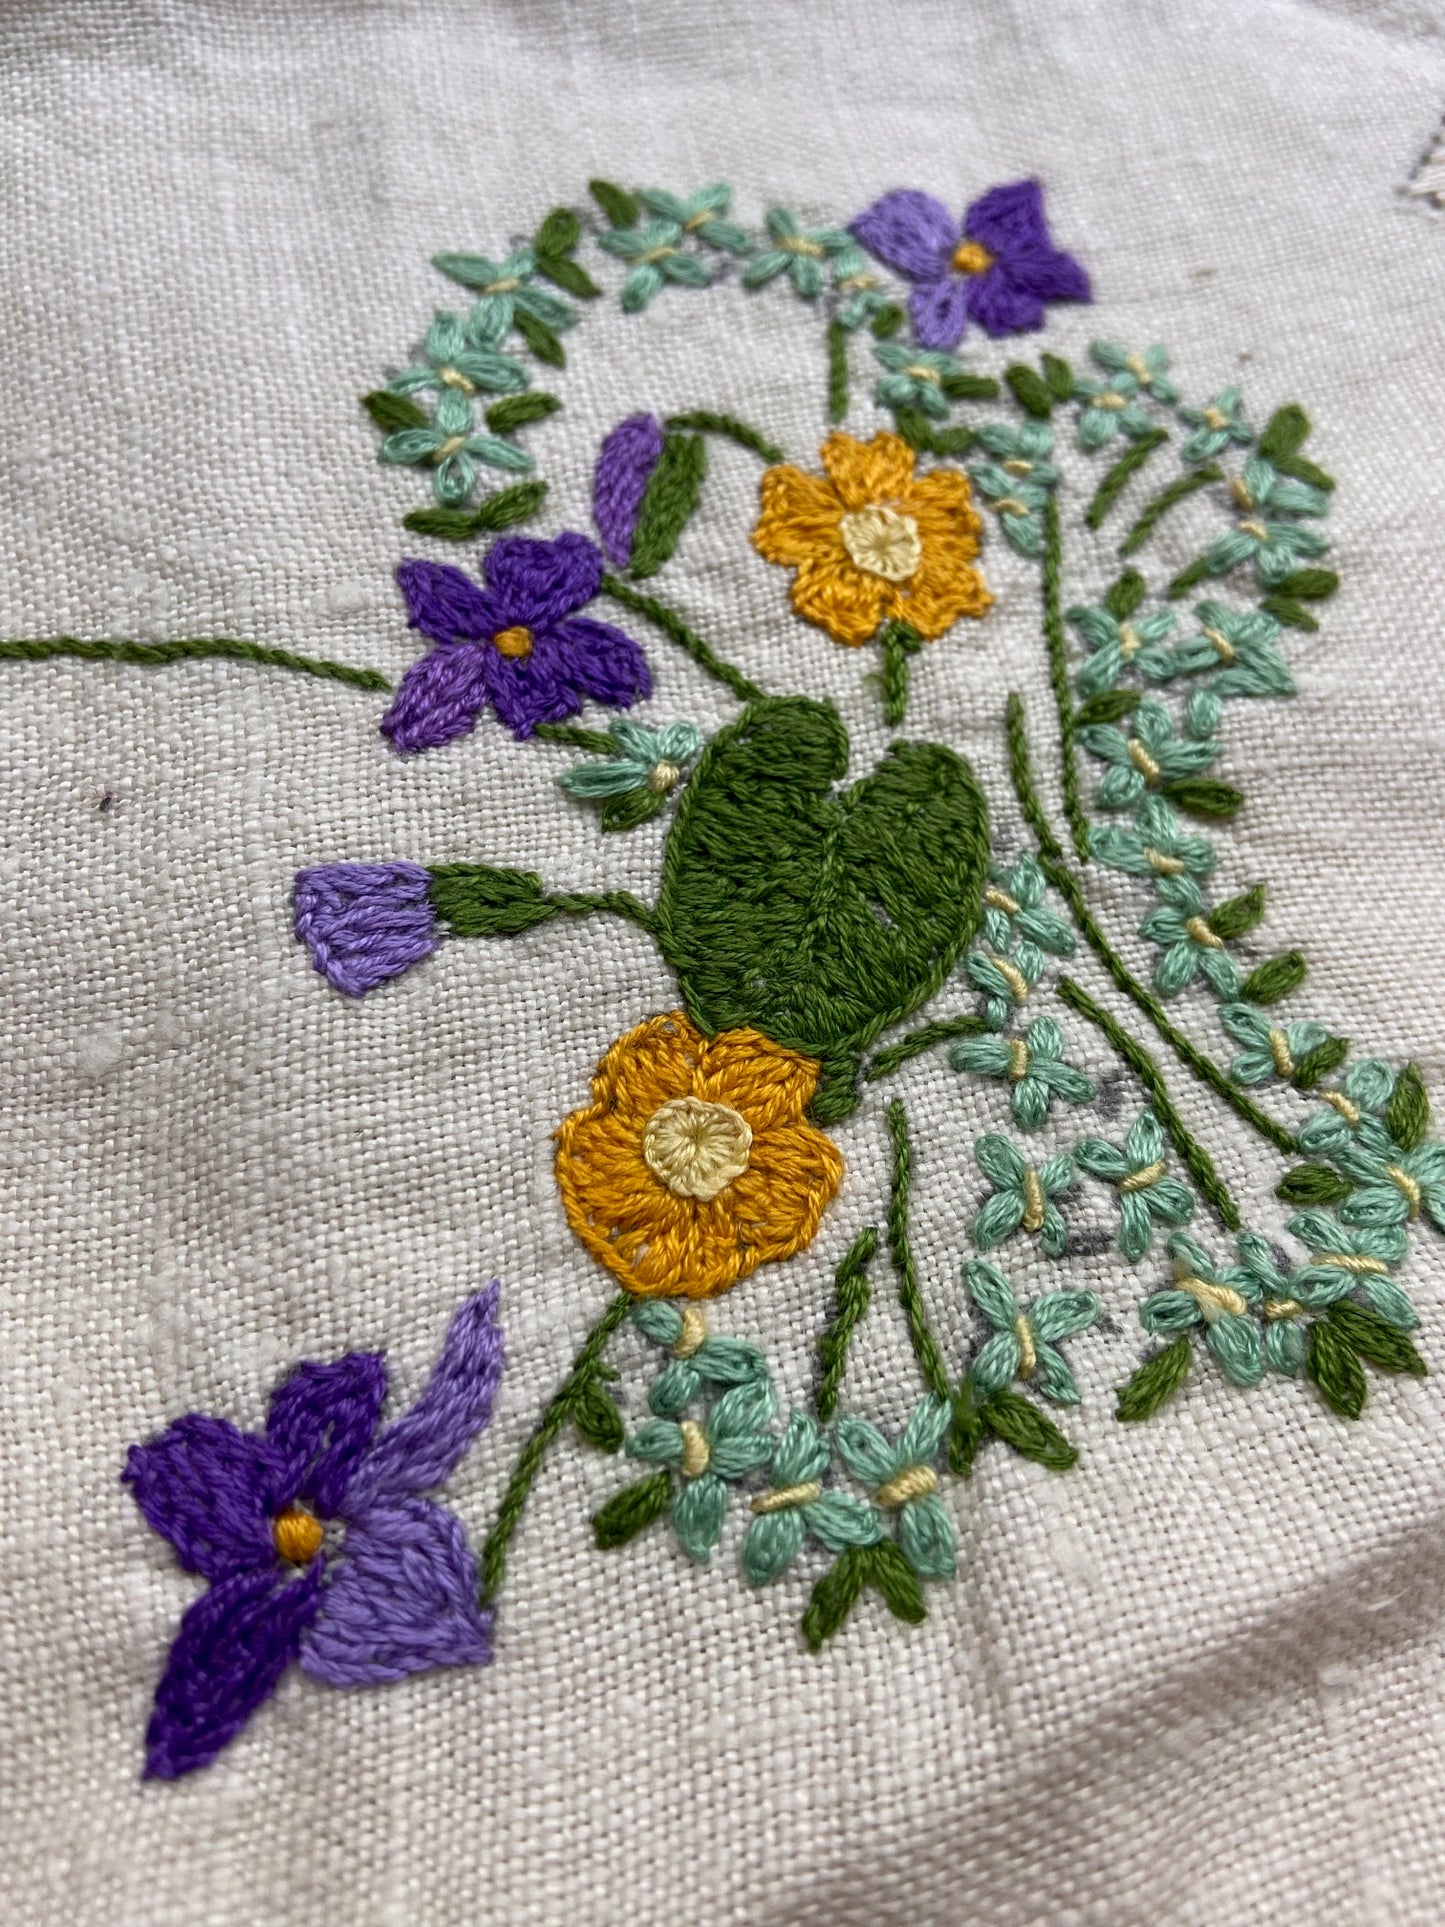 Item 23353 - Embroidered Tray Cloth